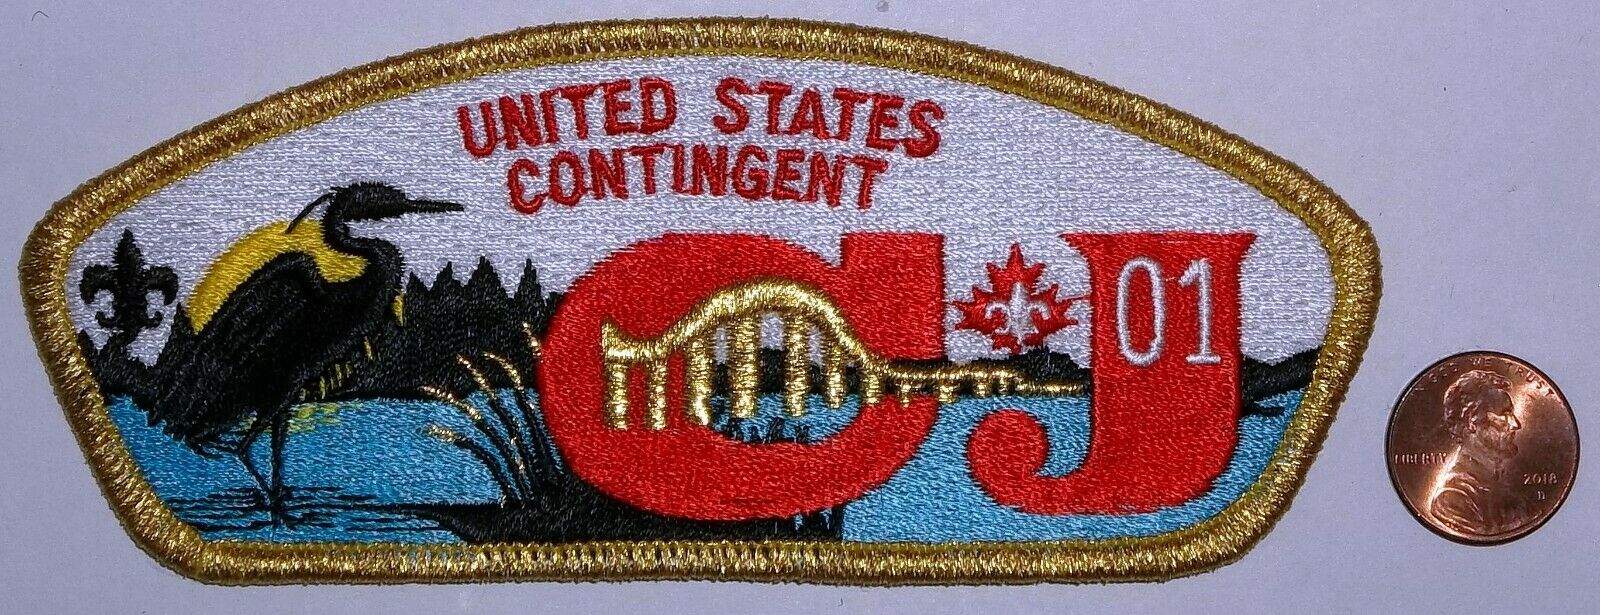 Bsa Bsc 2001 United States Canadian Jamboree Contingent Seagull Pocket Patch